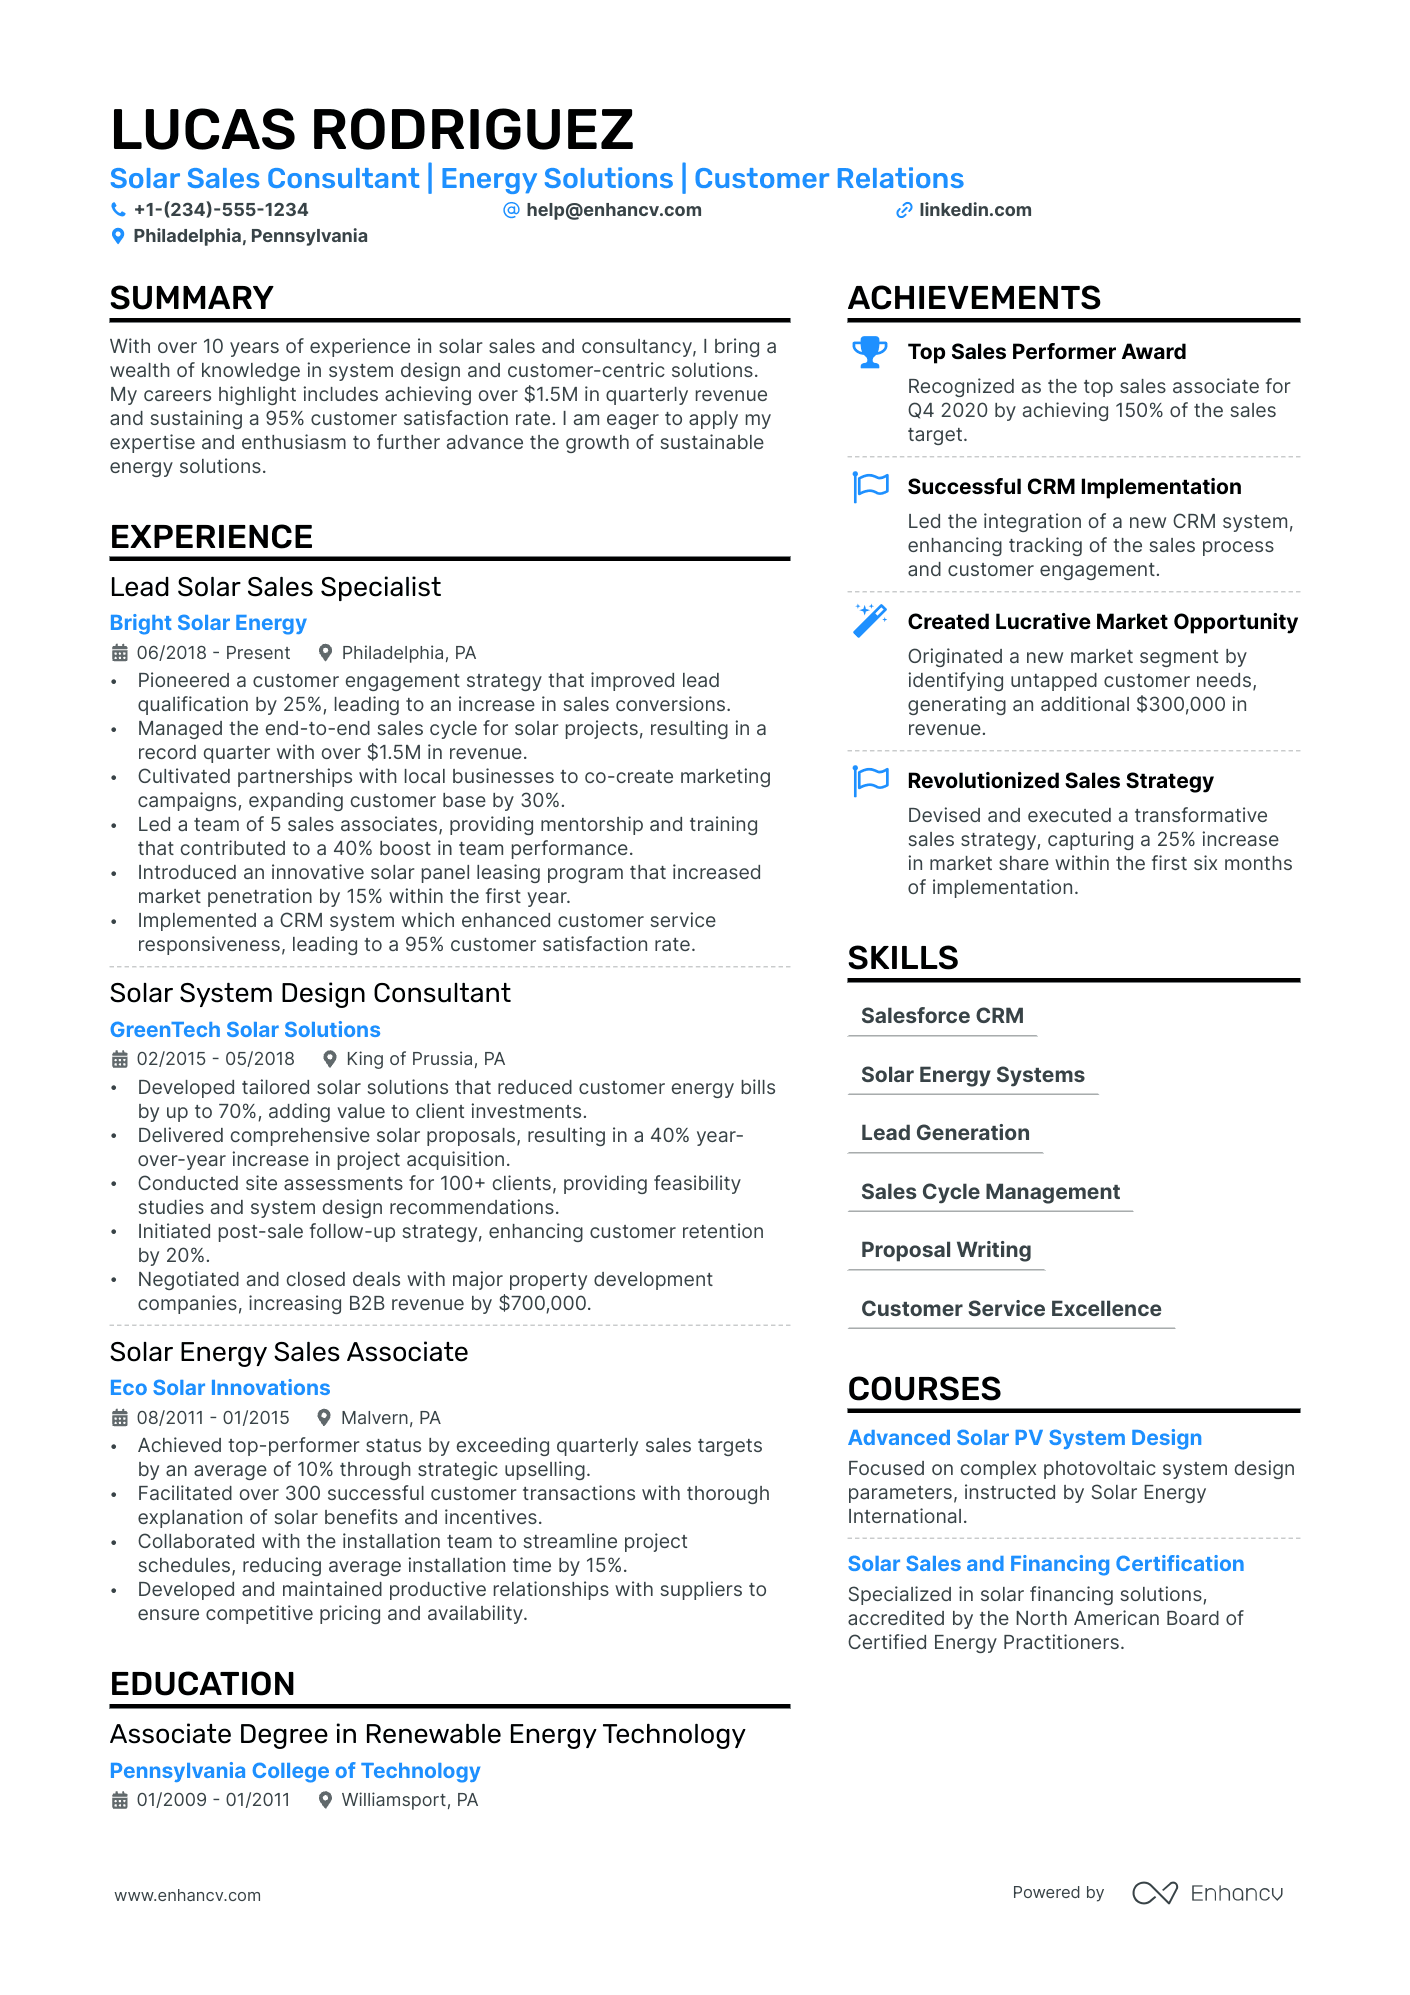 resume example for skills sales